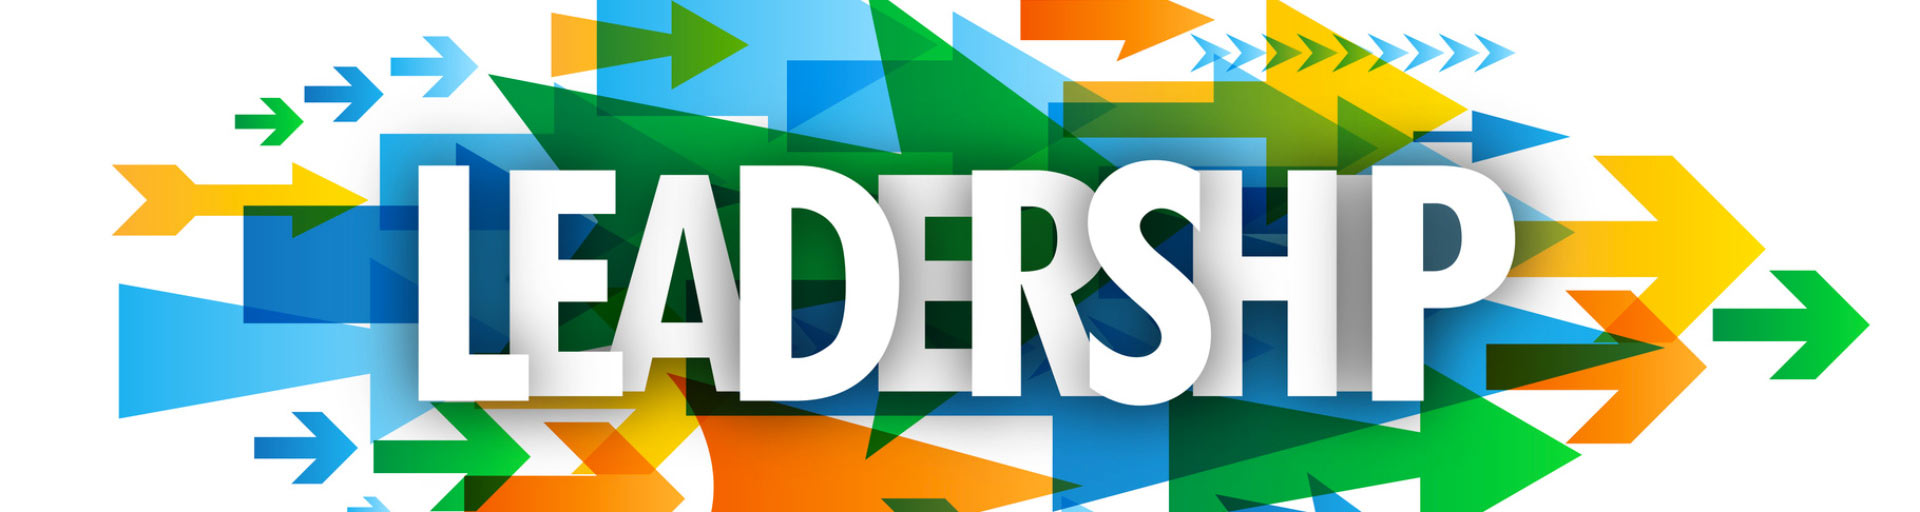 Leadership colorful text